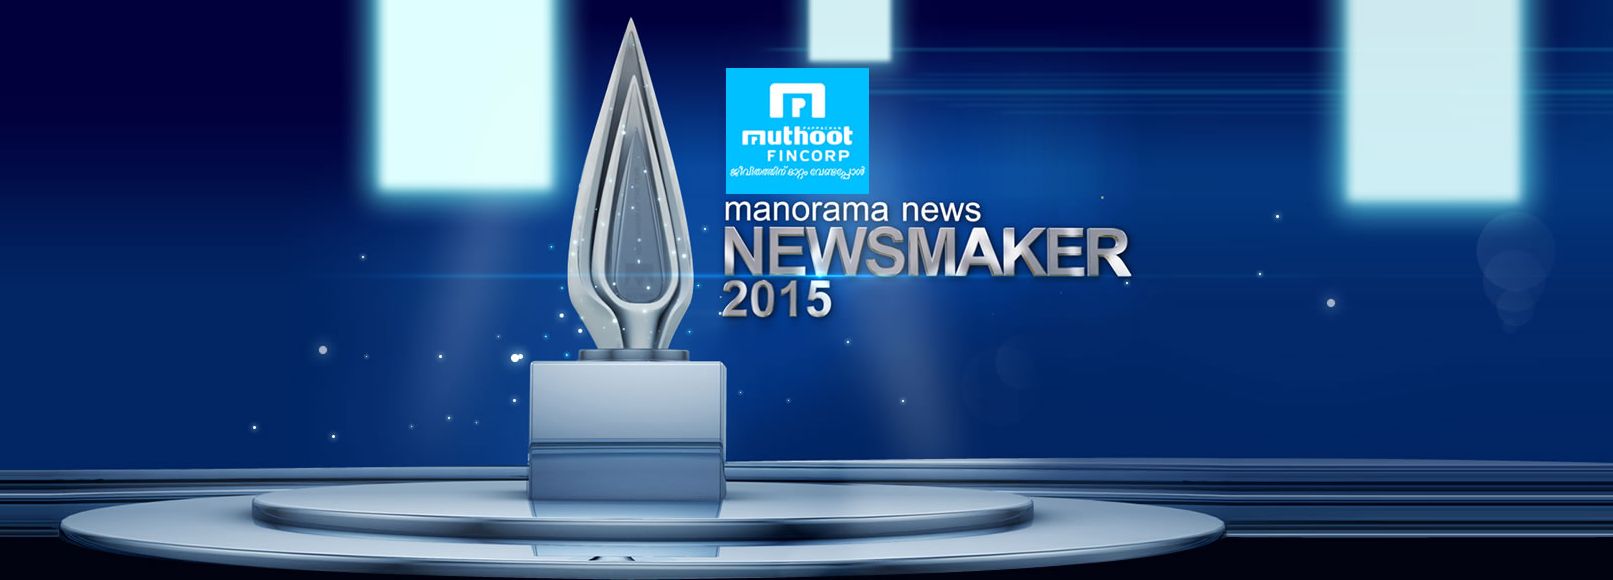 Aruvikkara Election Results Live On Manorama News Channel 4